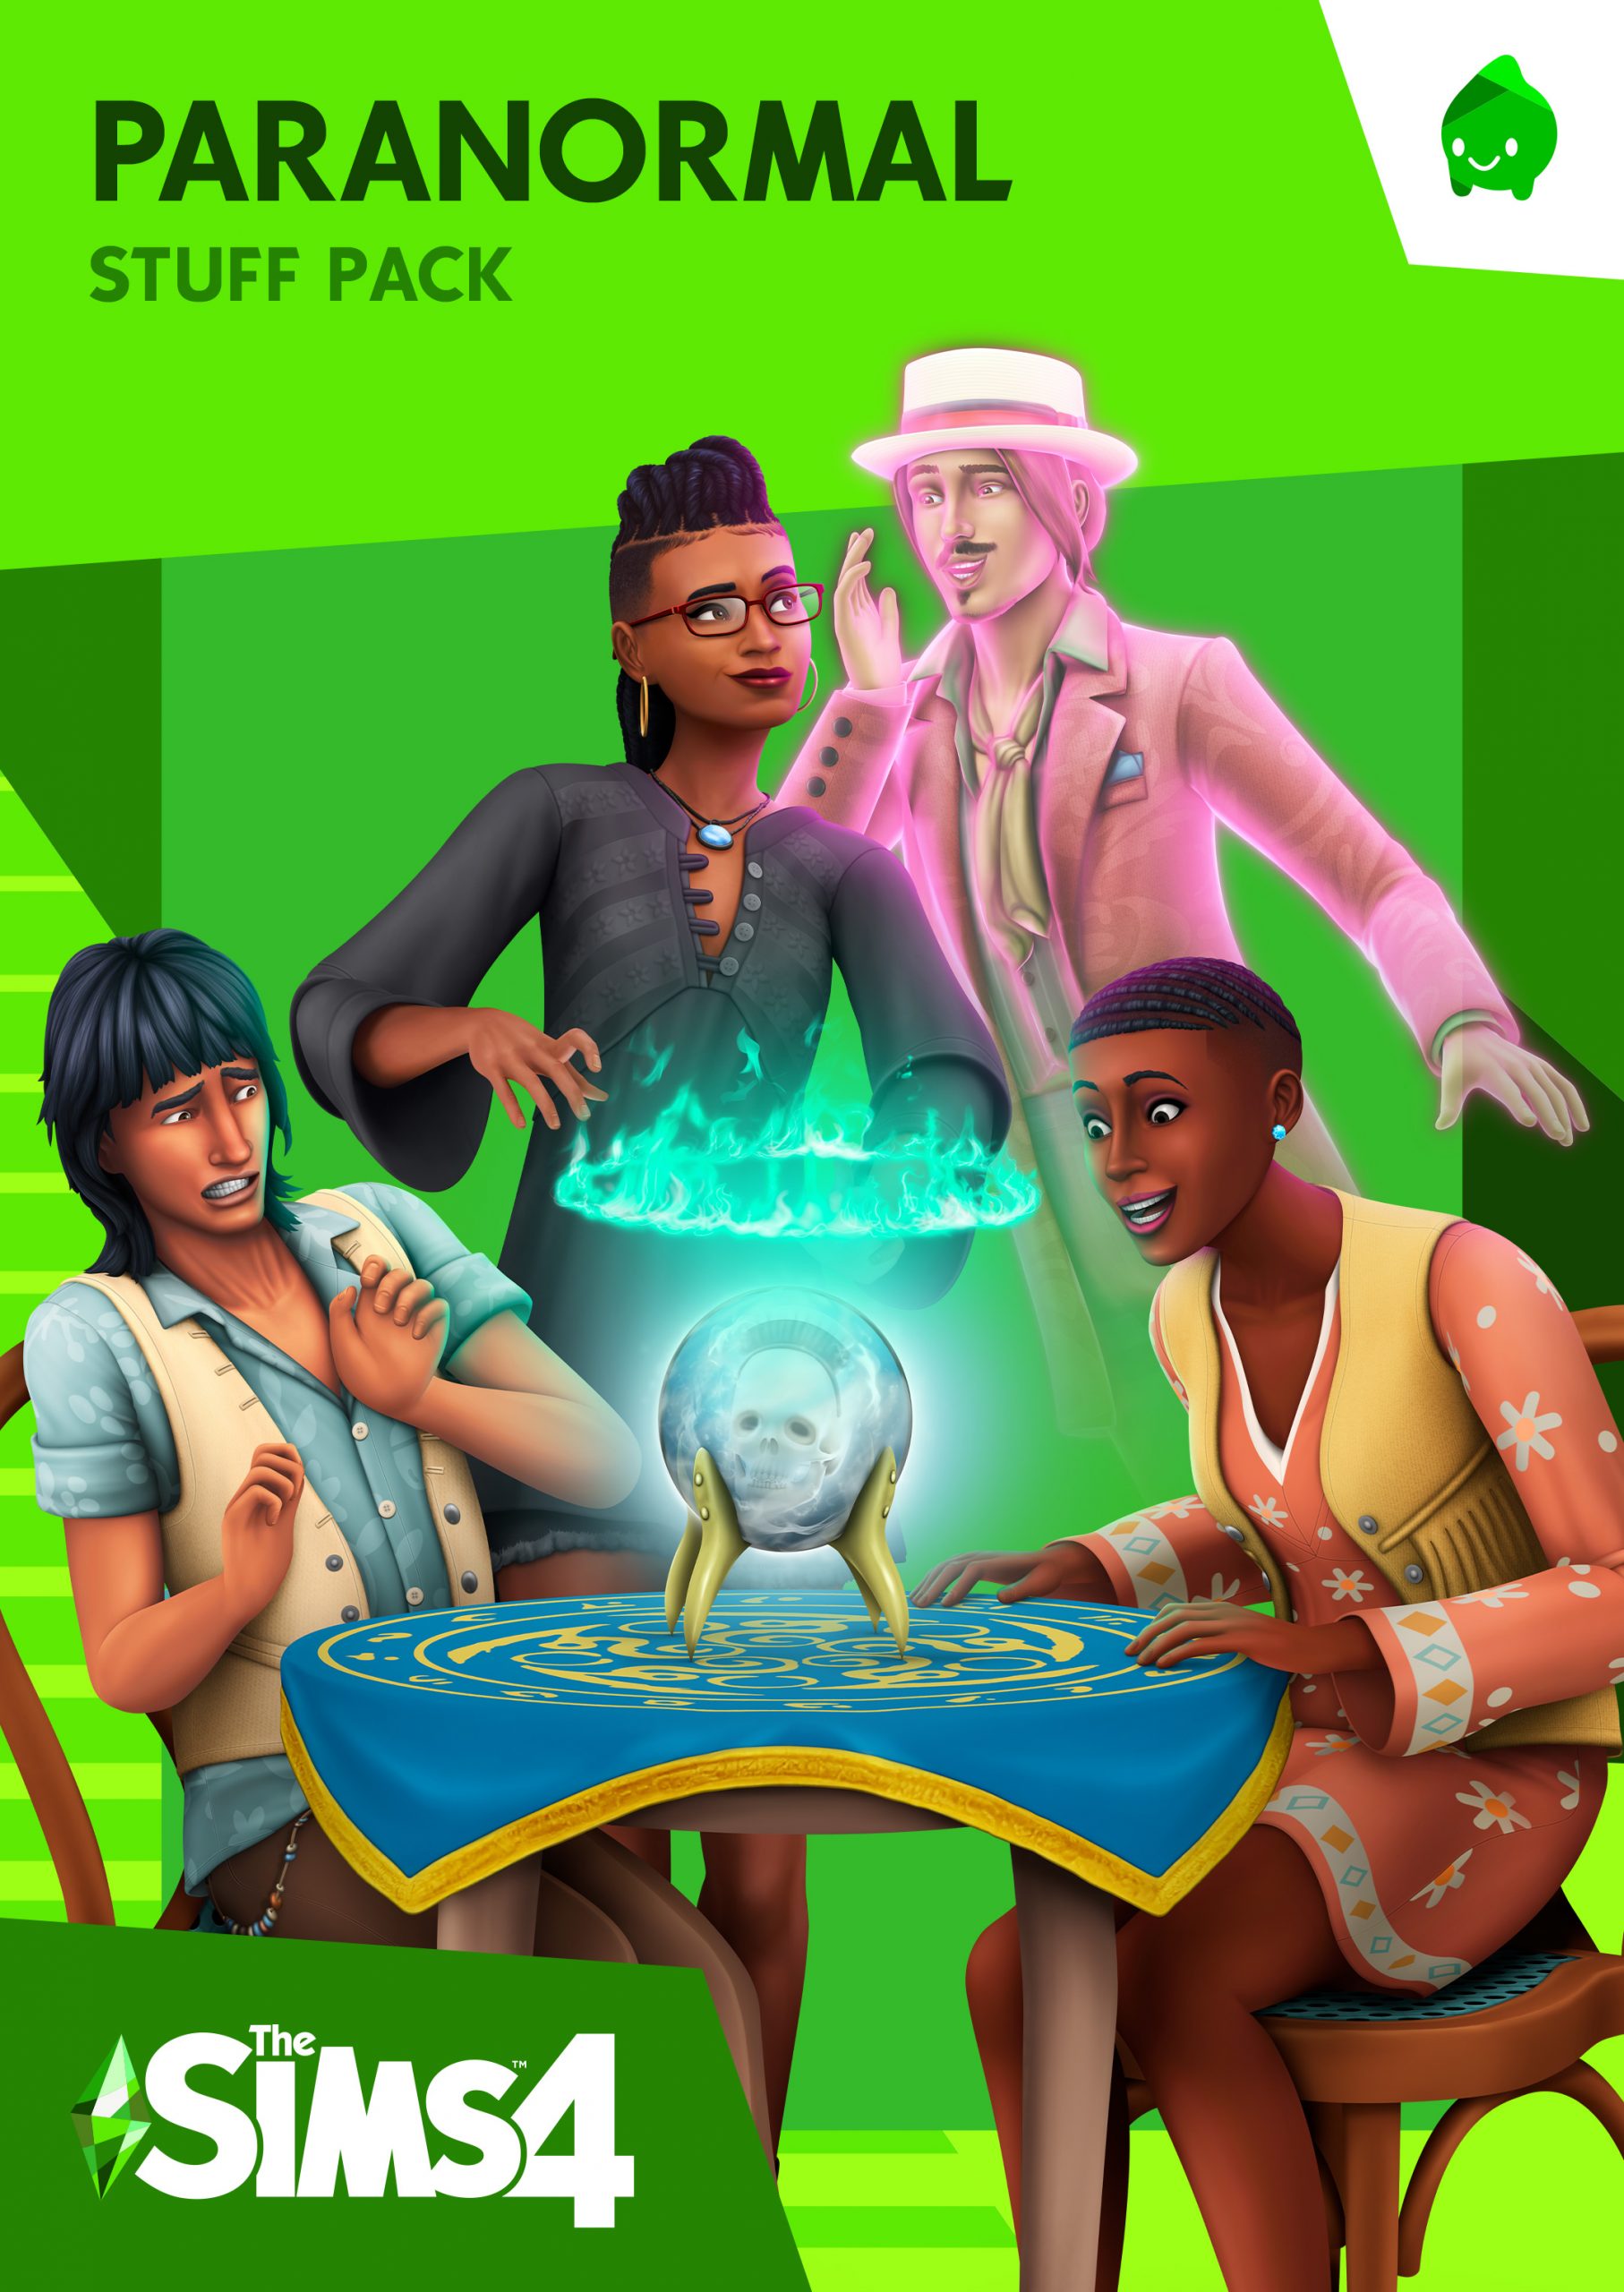 The Sims 4 Paranormal Stuff: Official Logo, Box Art, Icon and Render ...